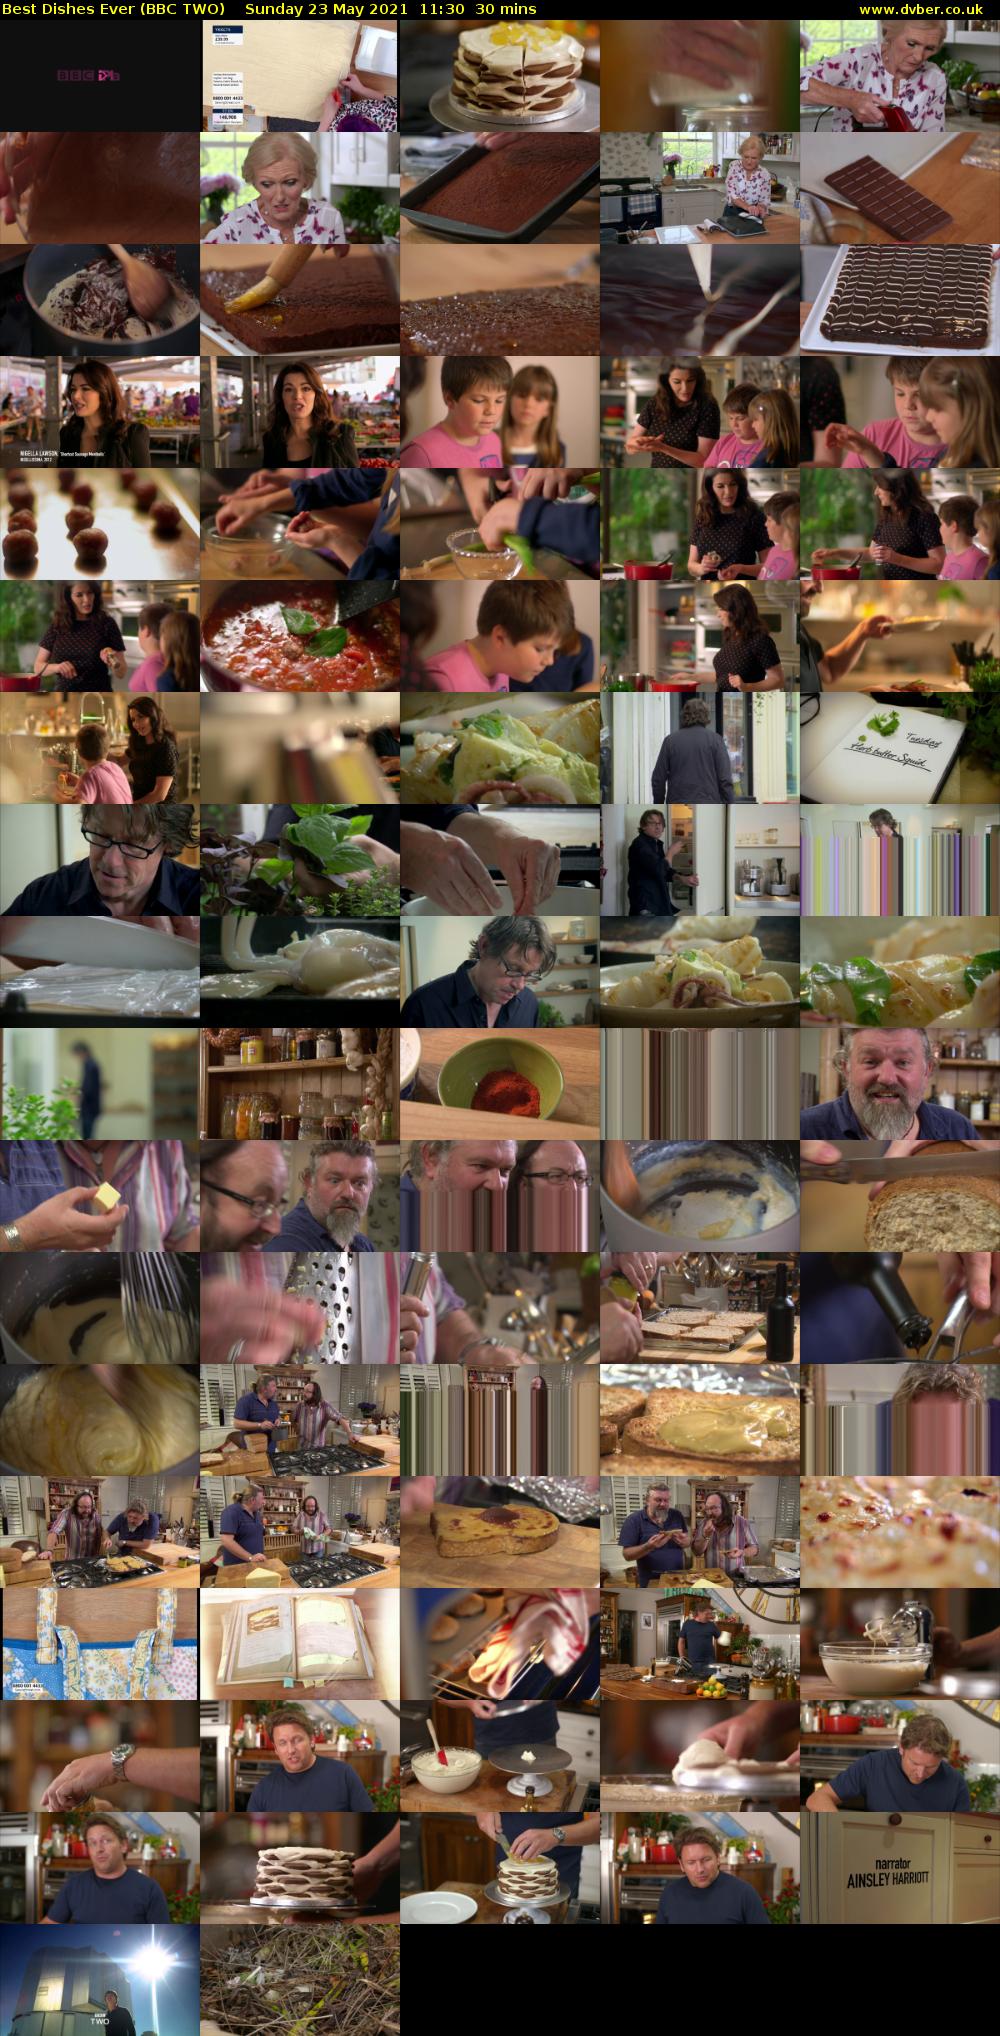 Best Dishes Ever (BBC TWO) Sunday 23 May 2021 11:30 - 12:00